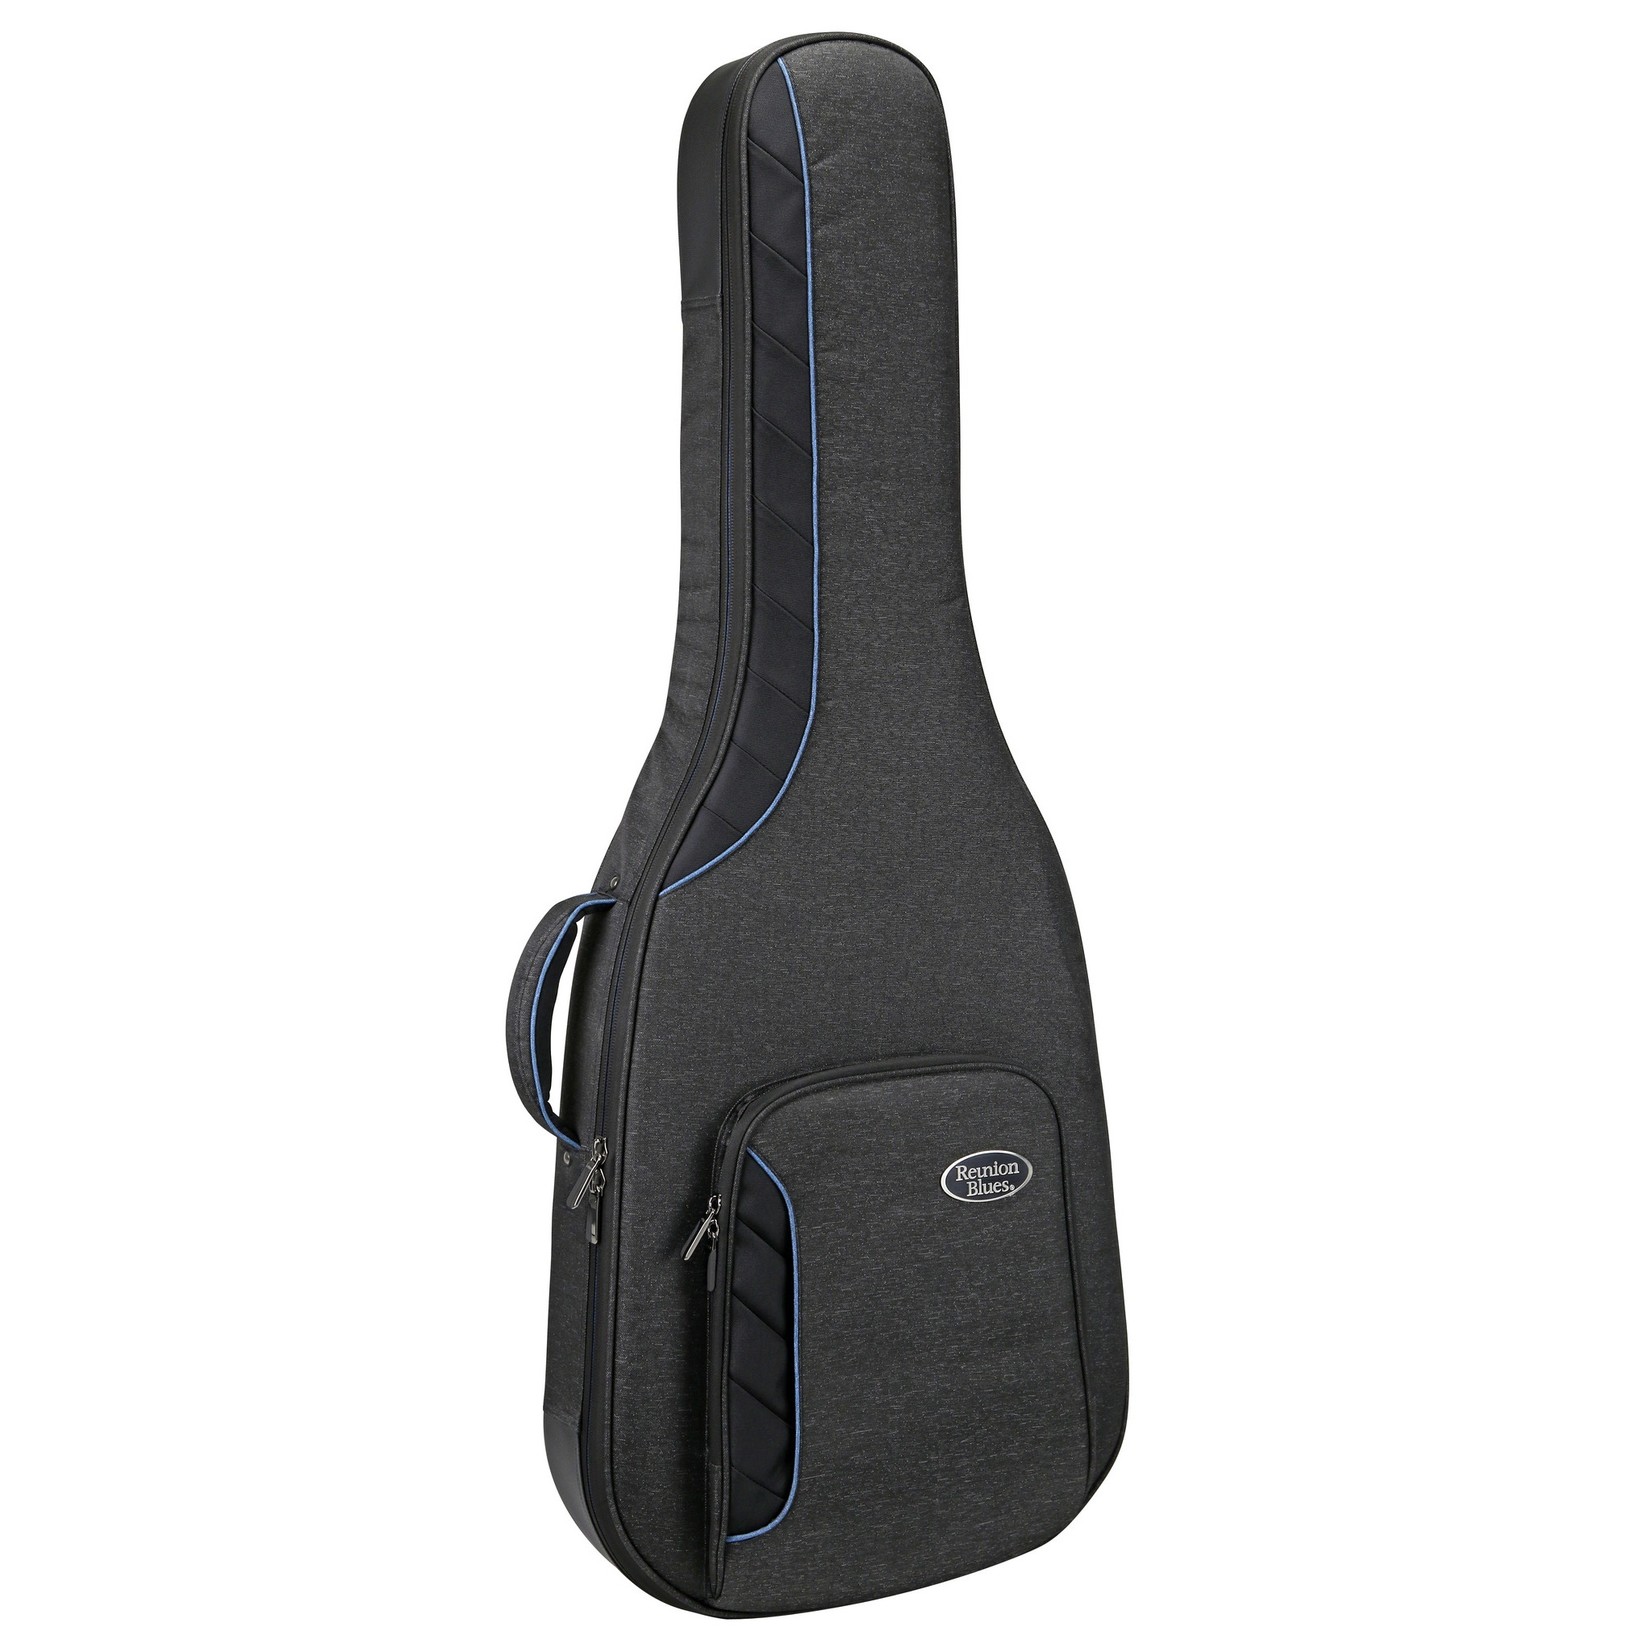 Reunion Blues Reunion Blues RB Continental Voyager Semi-Hollow Body Electric Guitar Case (Gig bag, hybrid, RBCSH)